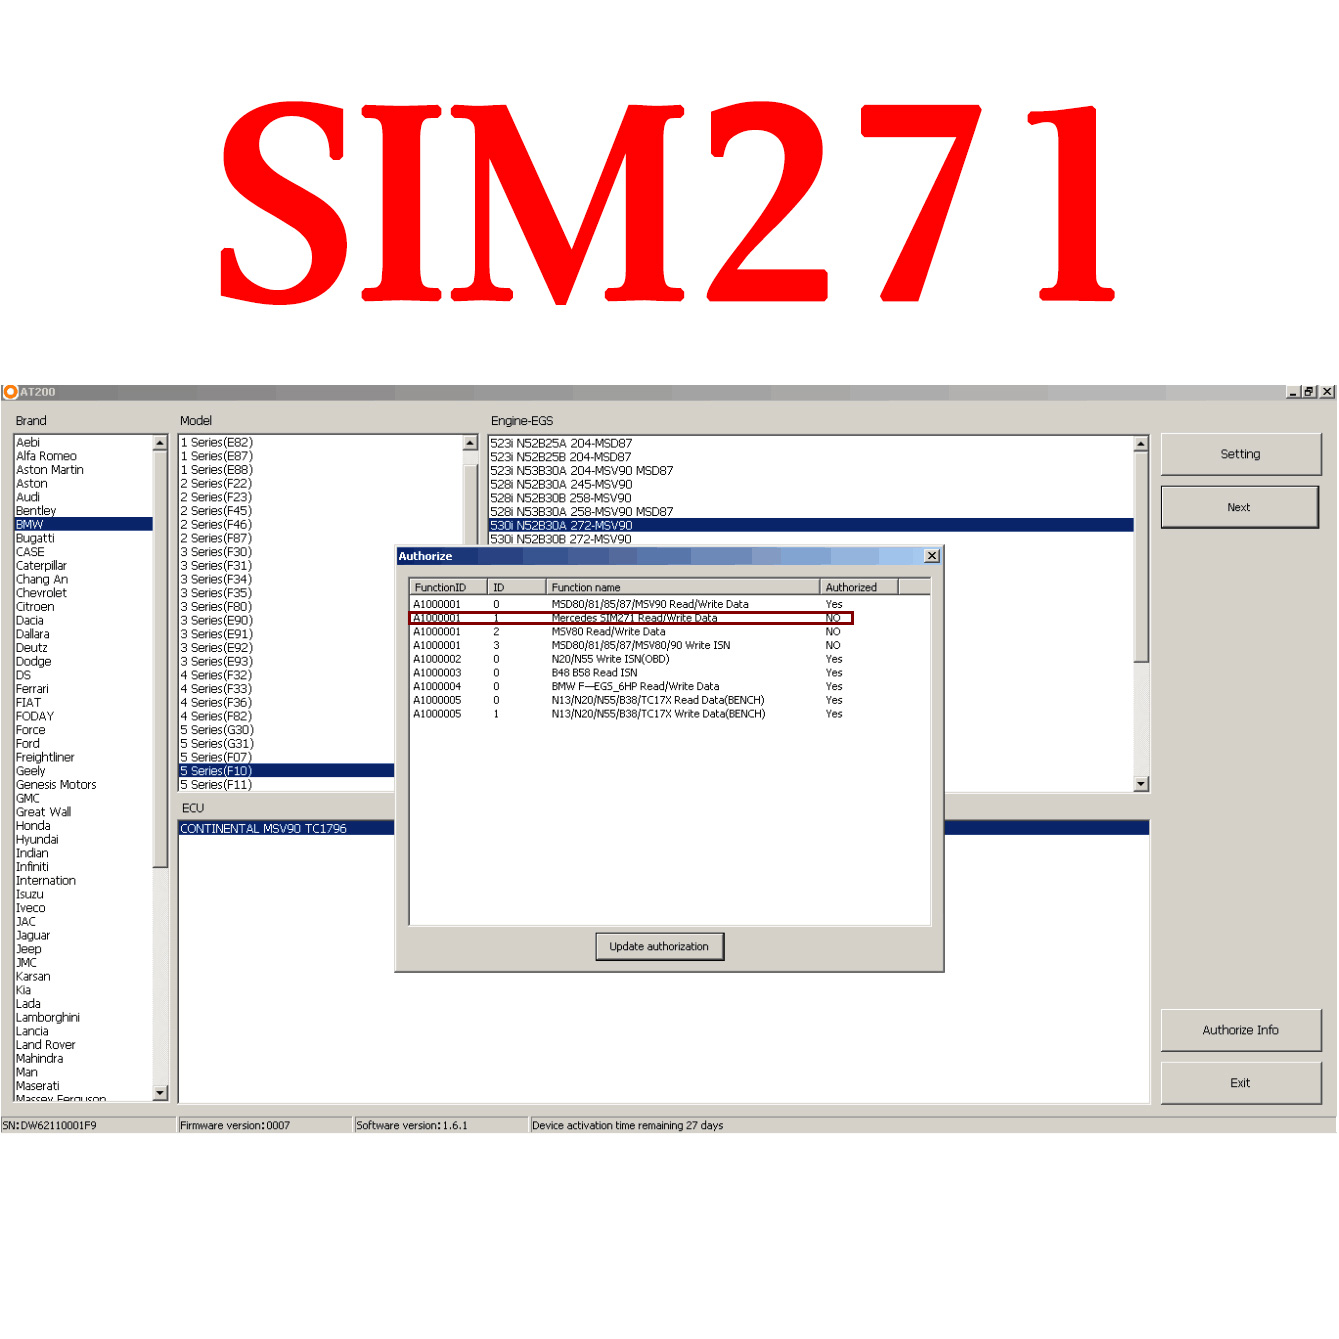 Update Service for AT-200 to Read Write Mercedes SIM271 Data